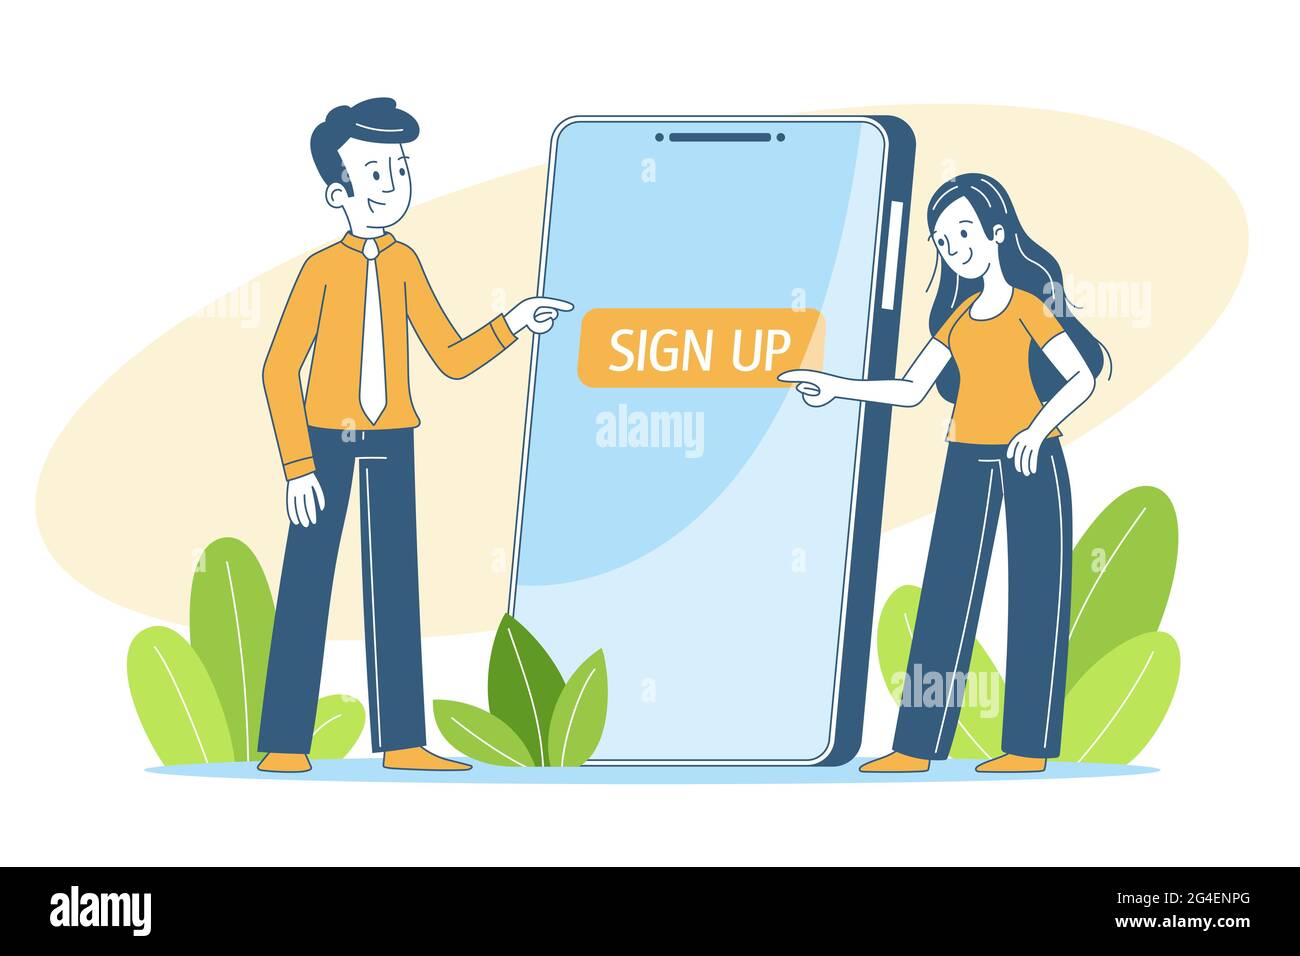 Social Media Temlate. Two Characters Signs Up. Stock Vector